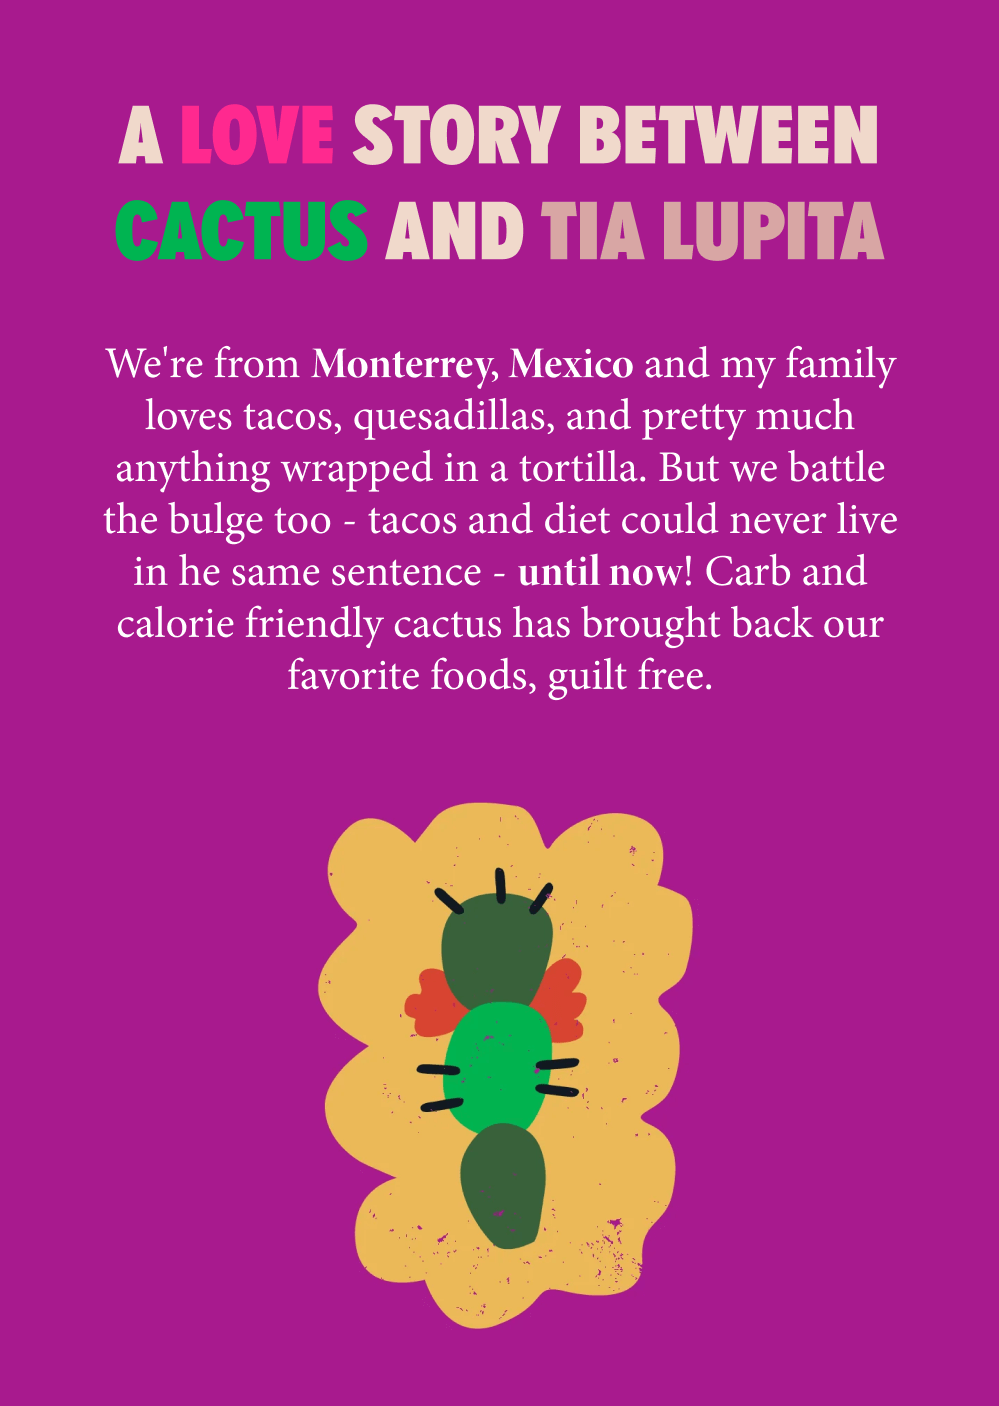 A love story between cactus and Tia Lupita, highlighting the family from Monterrey, Mexico, and their love for tacos and quesadillas. Discusses the carb and calorie-friendly benefits of cactus. Includes a cactus illustration